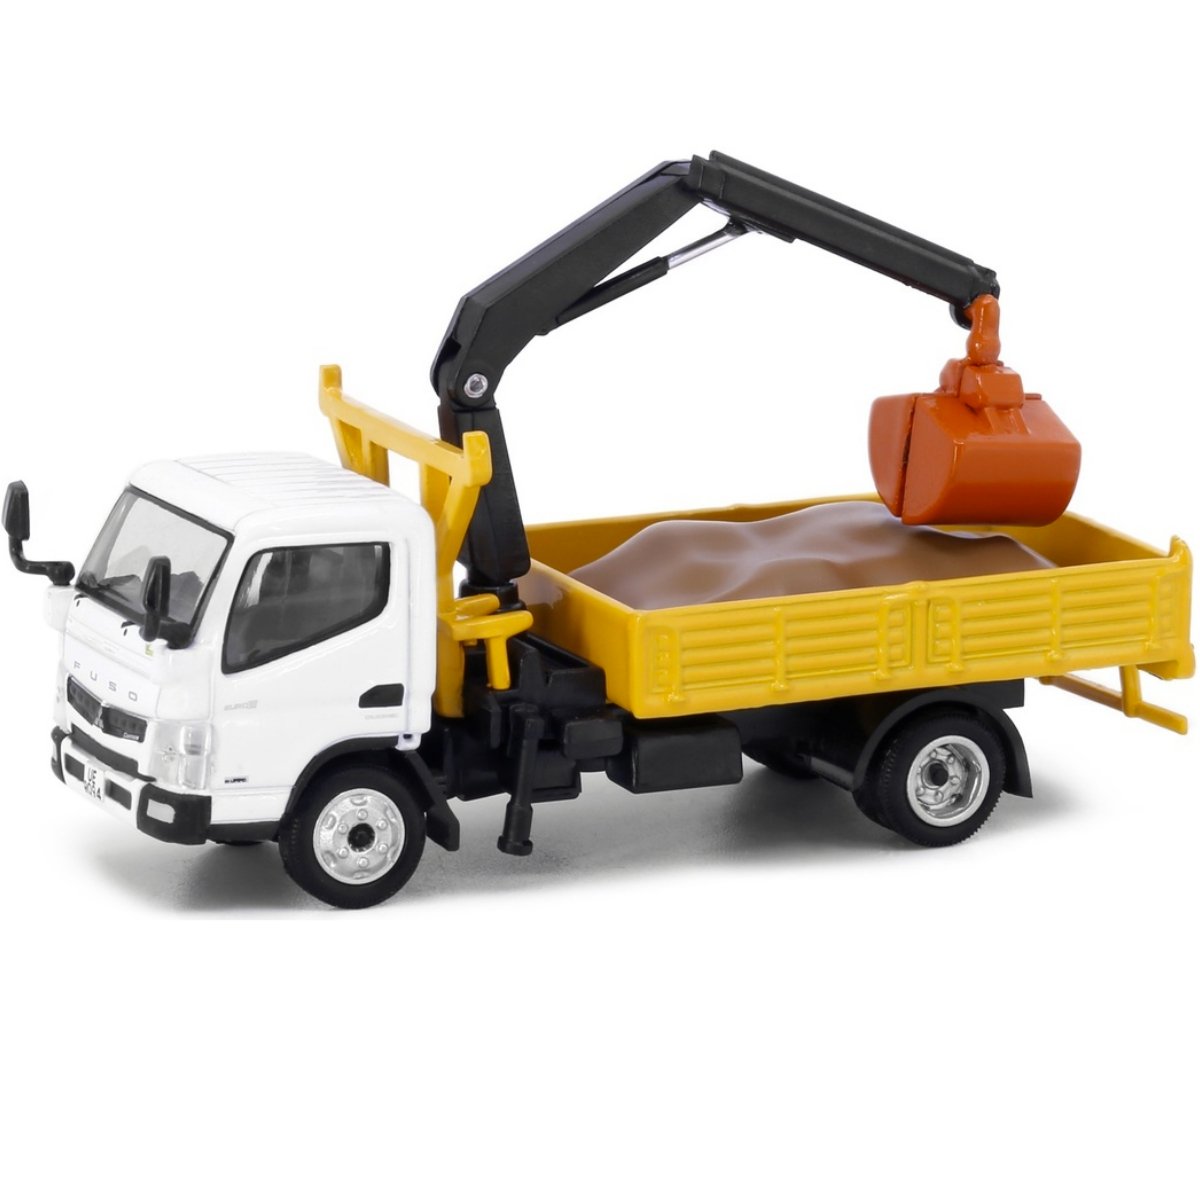 Tiny Models Mitsubishi Fuso Canter Grab Lorry (1:76 Scale) - Phillips Hobbies